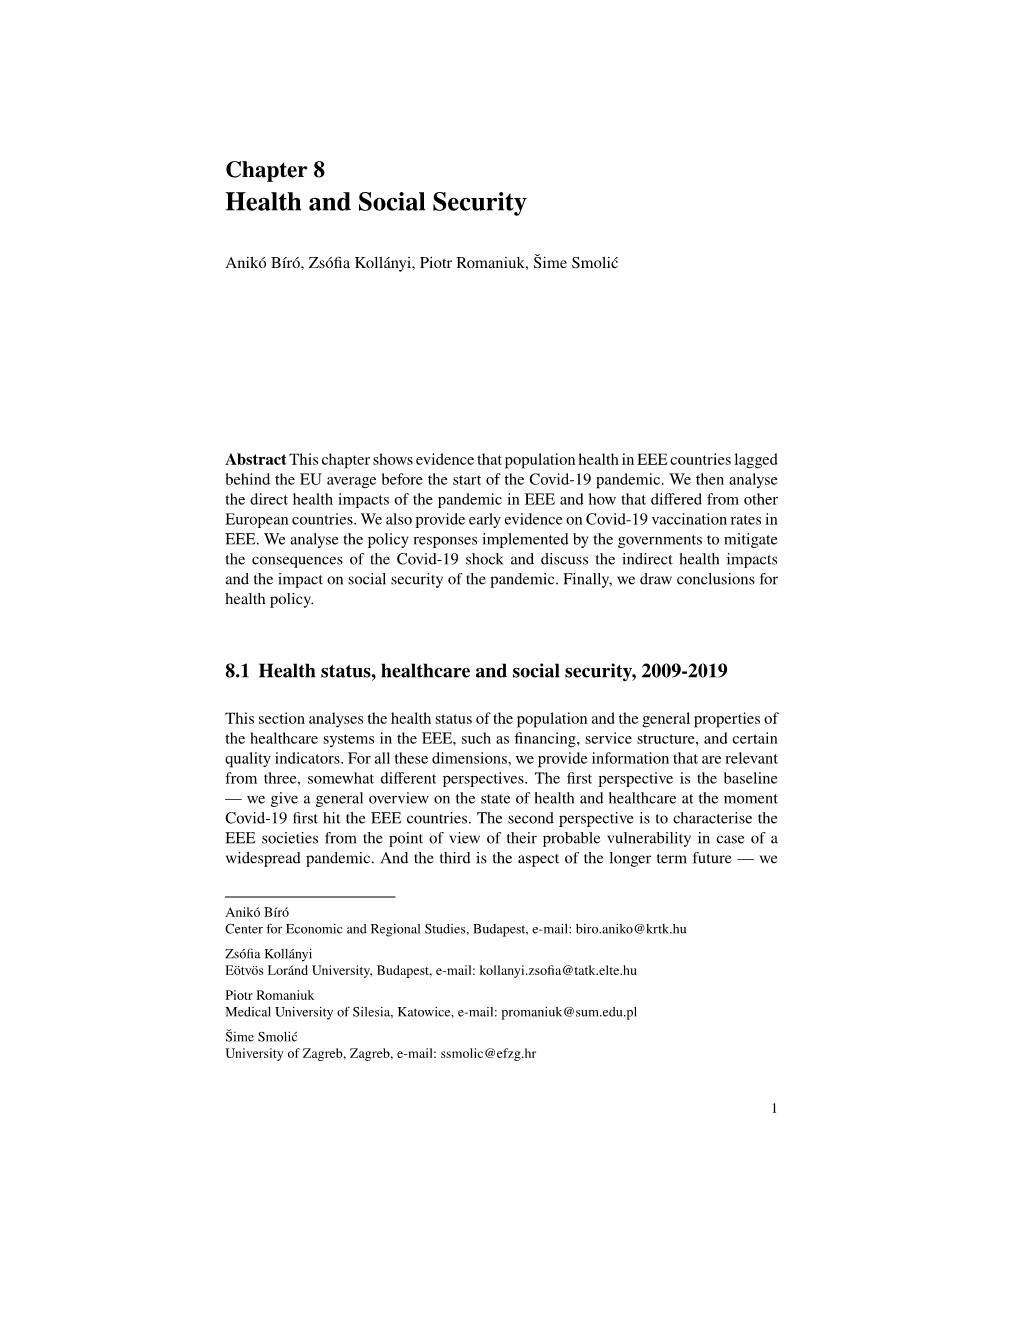 Health and Social Security